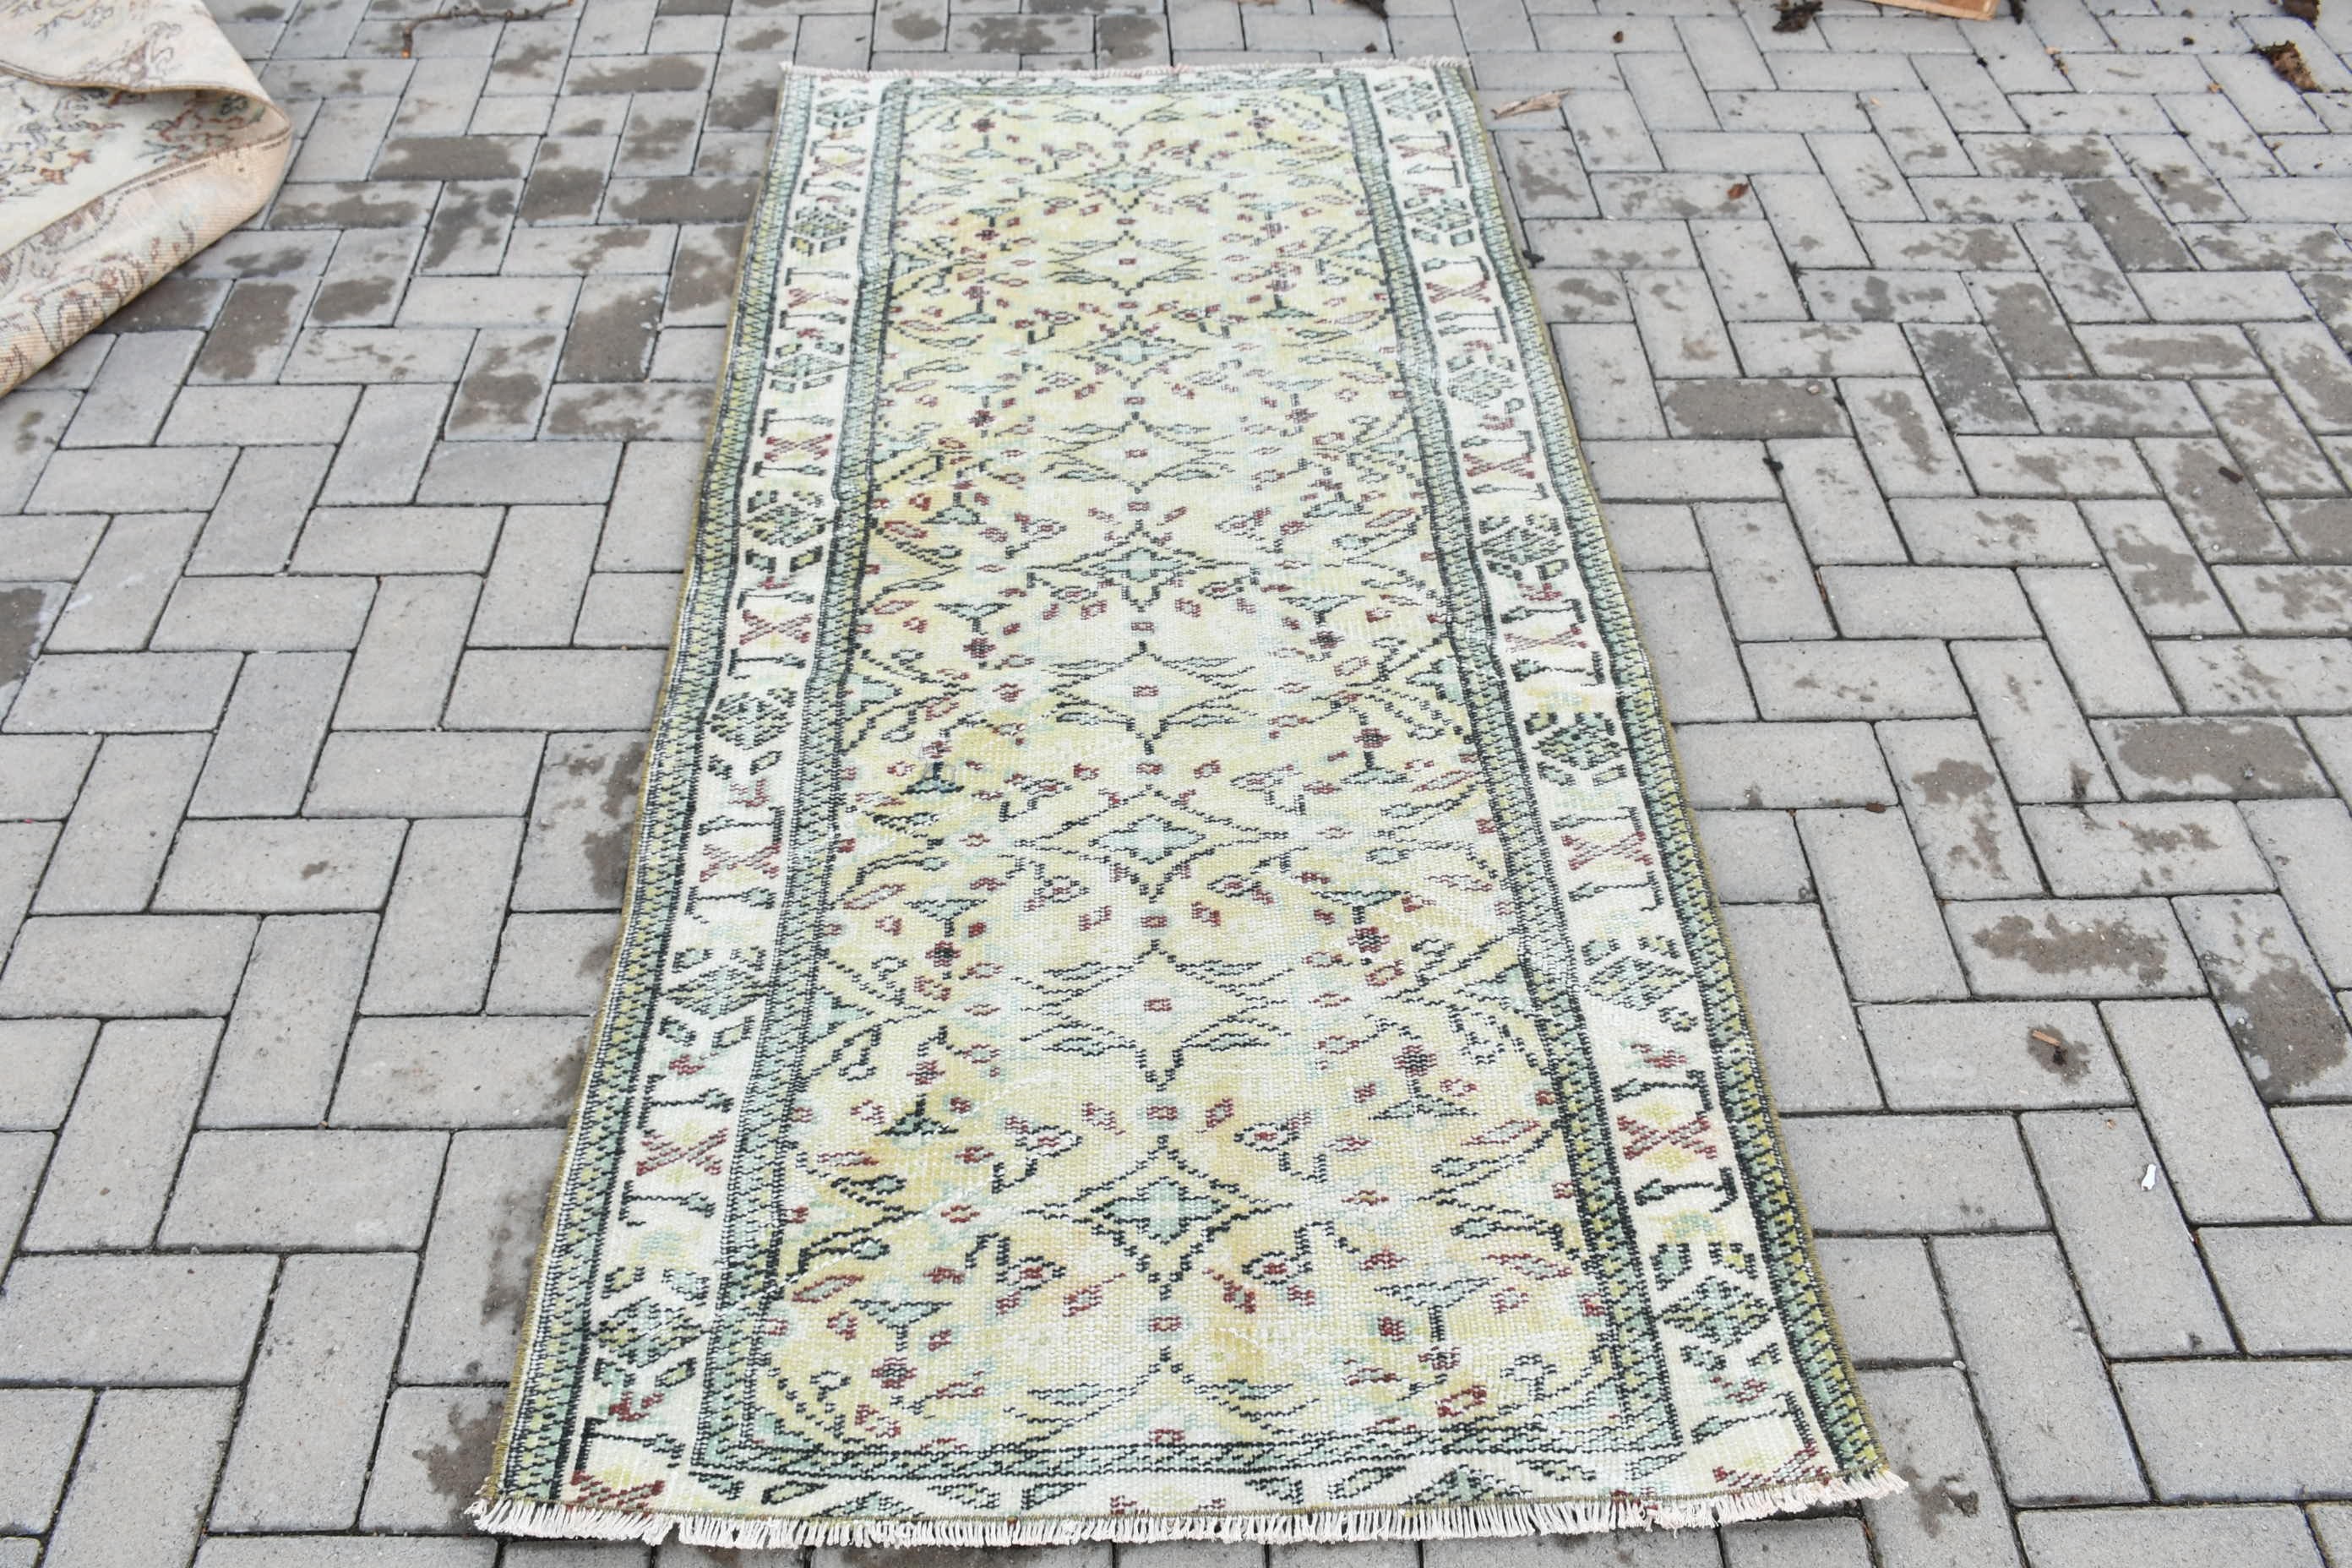 Cool Rugs, Beige Wool Rugs, Rugs for Kitchen, Entry Rug, Kitchen Rug, Nursery Rugs, 3.1x6.1 ft Accent Rug, Vintage Rug, Turkish Rug